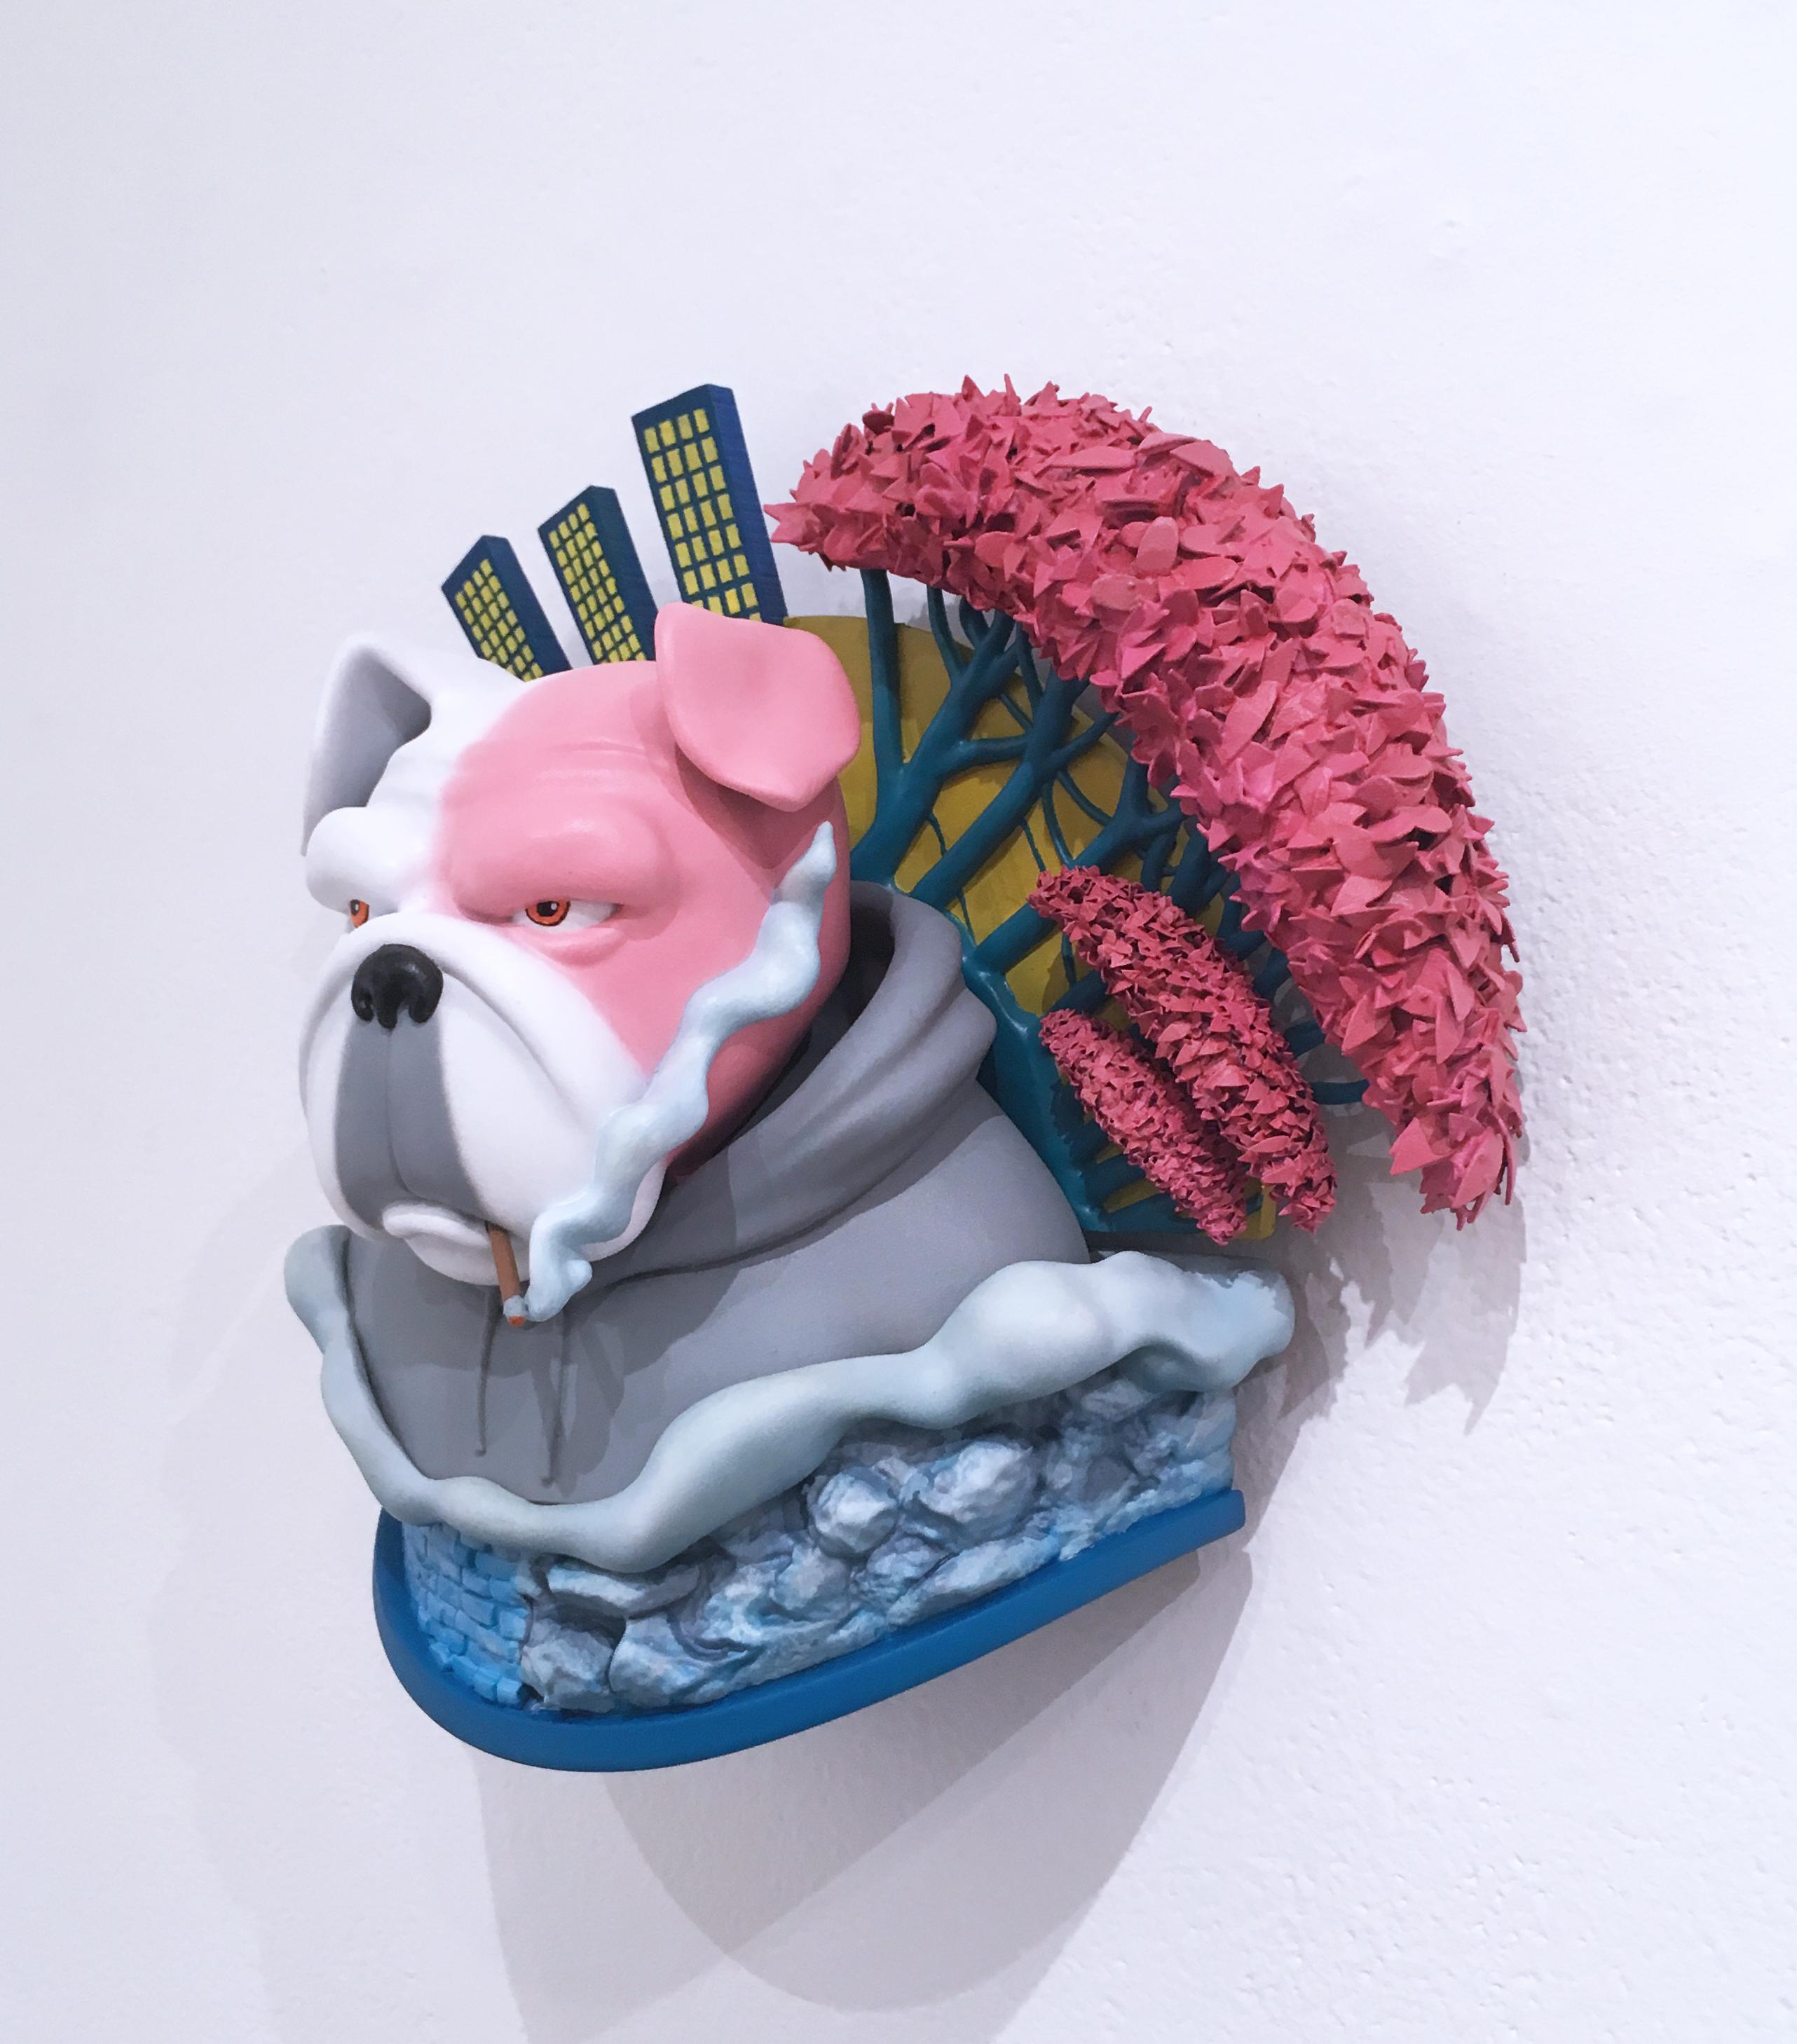 Frank Wall I by Concrete Jungle, 3-D printed pop art bull dog wall sculpture

3d sculptural modeling followed by 3d sculpture printing, a resin sculpture hand painted with airbrush acrylic paint.  The character 